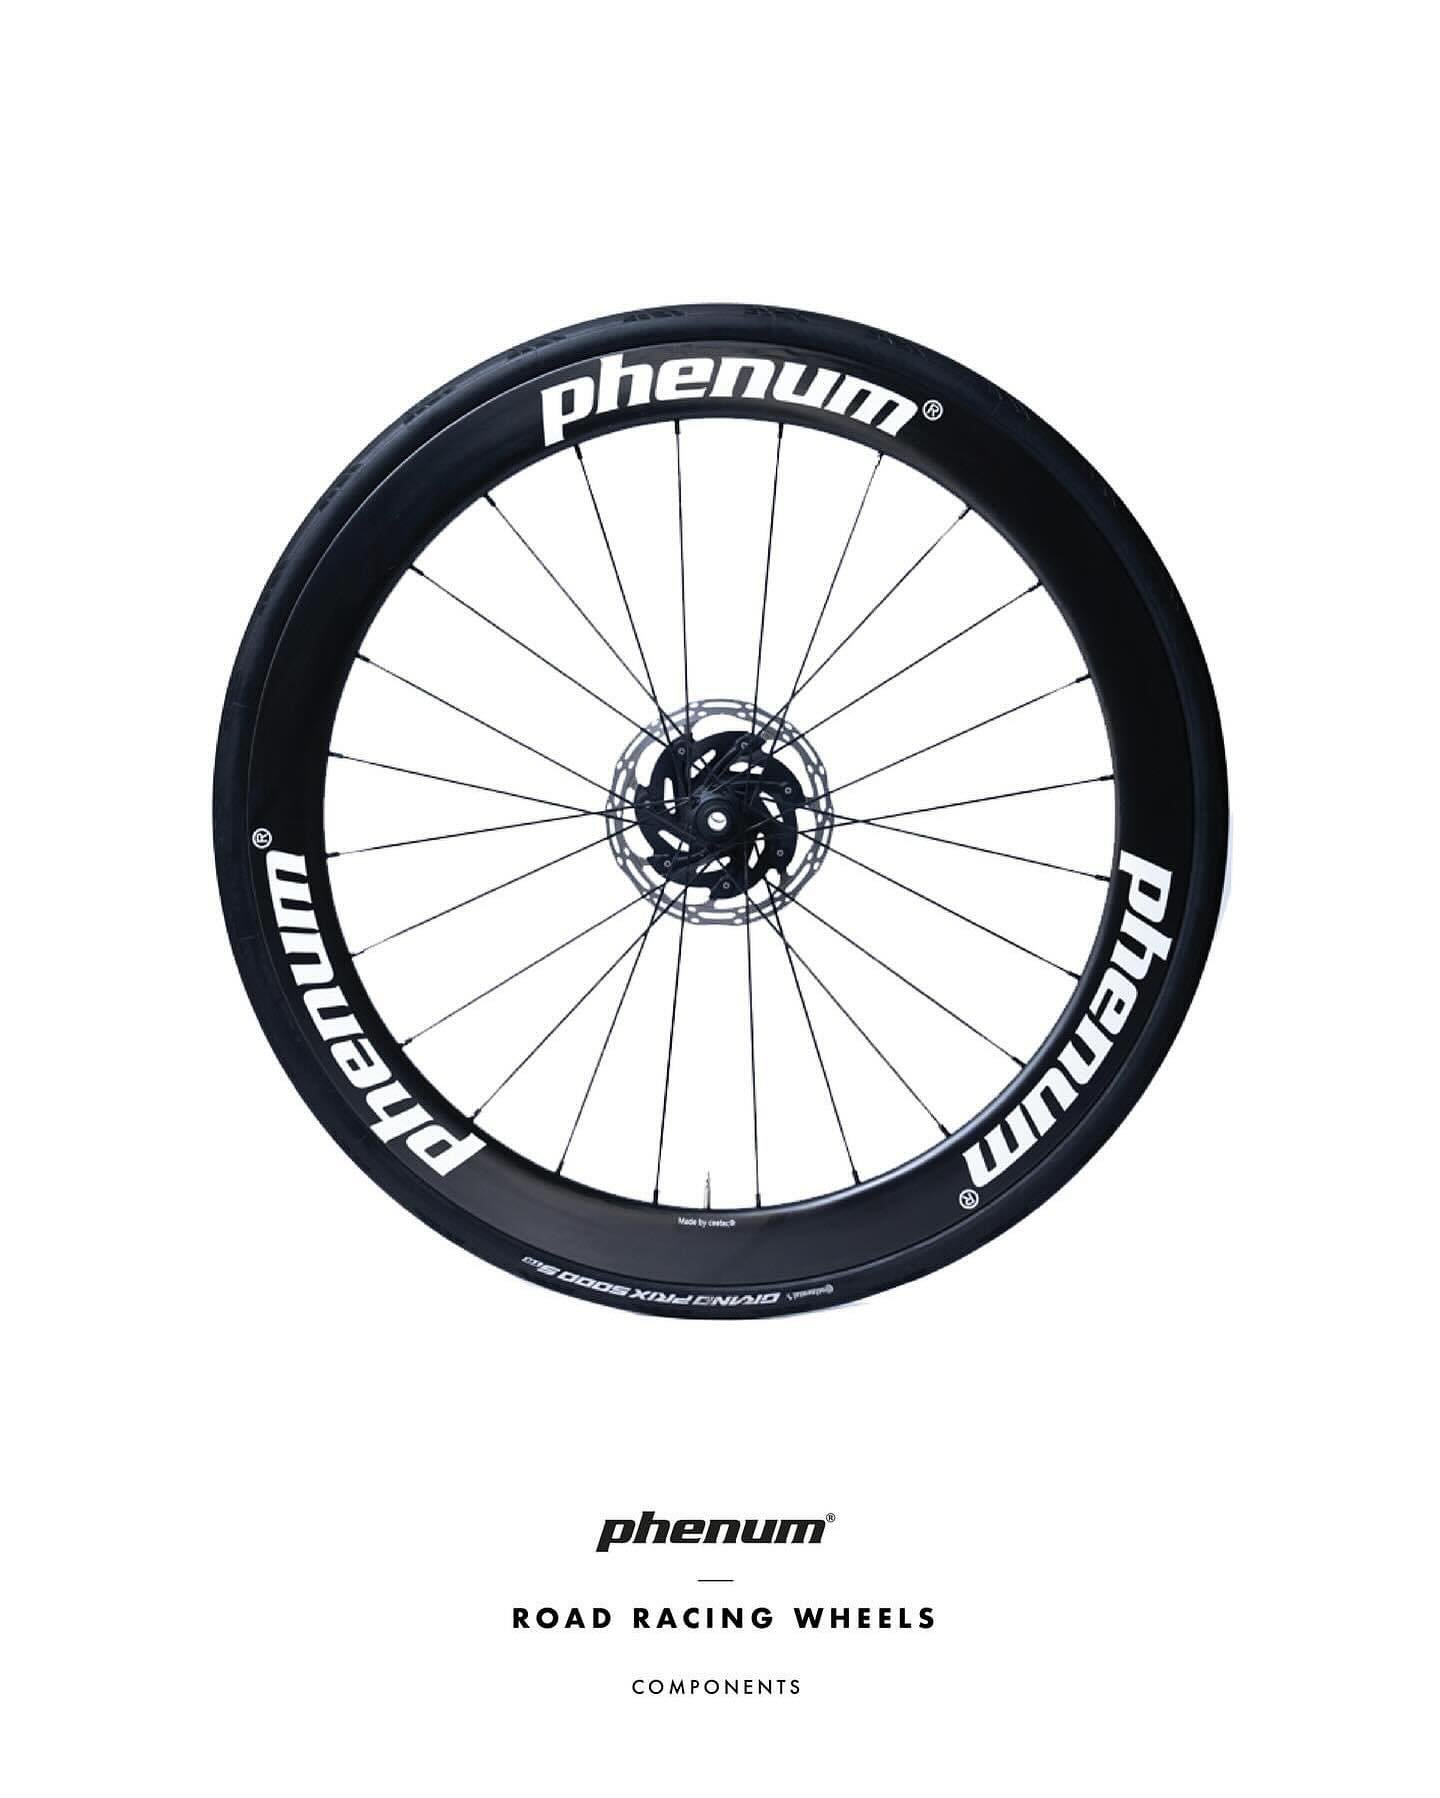 phenum&reg; 

Now also finally on the approved @uci_cycling  wheels.

The wind blows across the pure carbon surface, it feels like sailing and gives you the speed. You accelerate and have a smile on your face, no mattee of your despite your effort, t